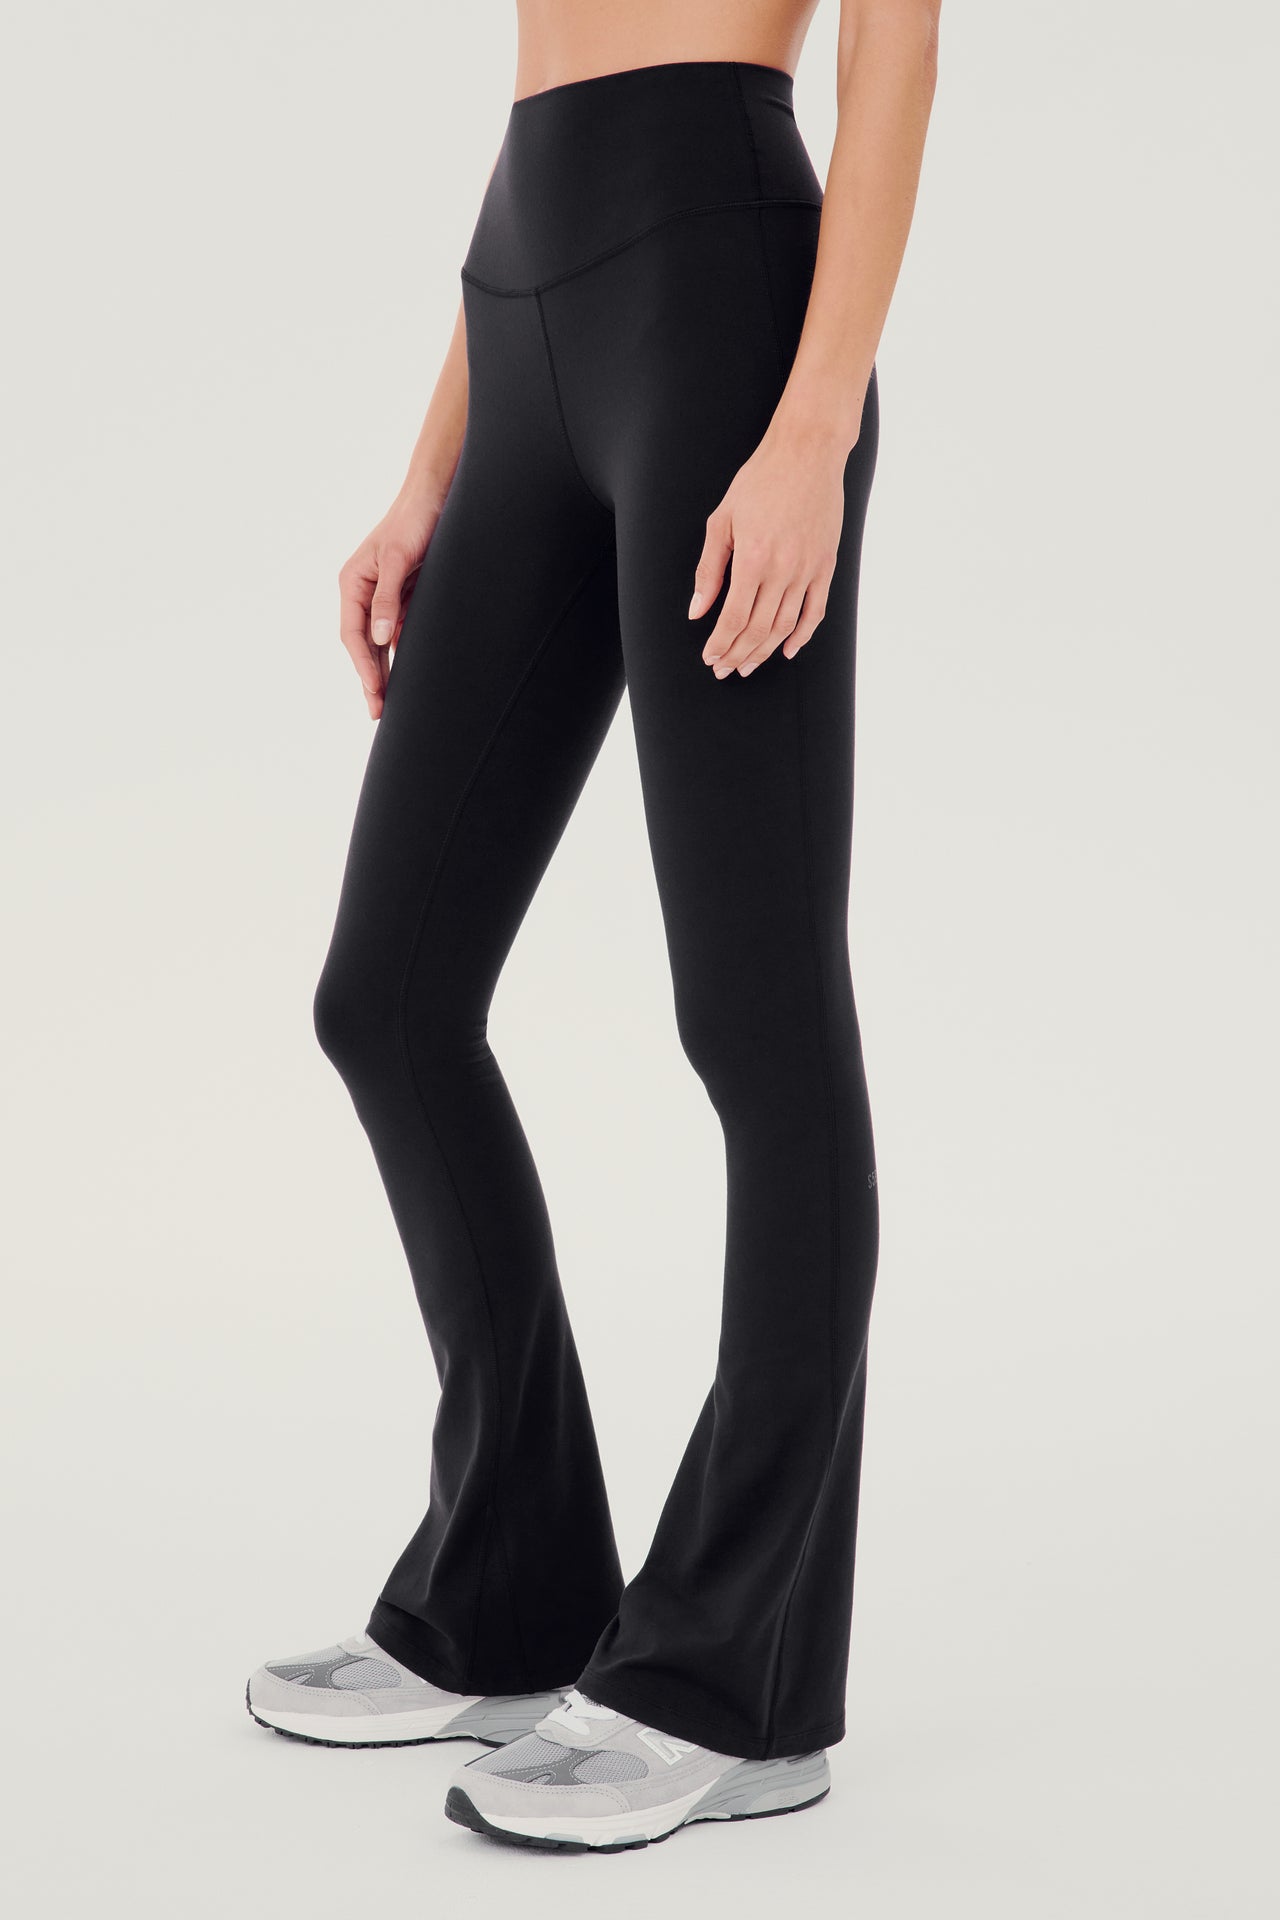 Front side view of woman wearing black high waist below ankle length legging with wide flared bottoms. Paired with white and gray shoes.